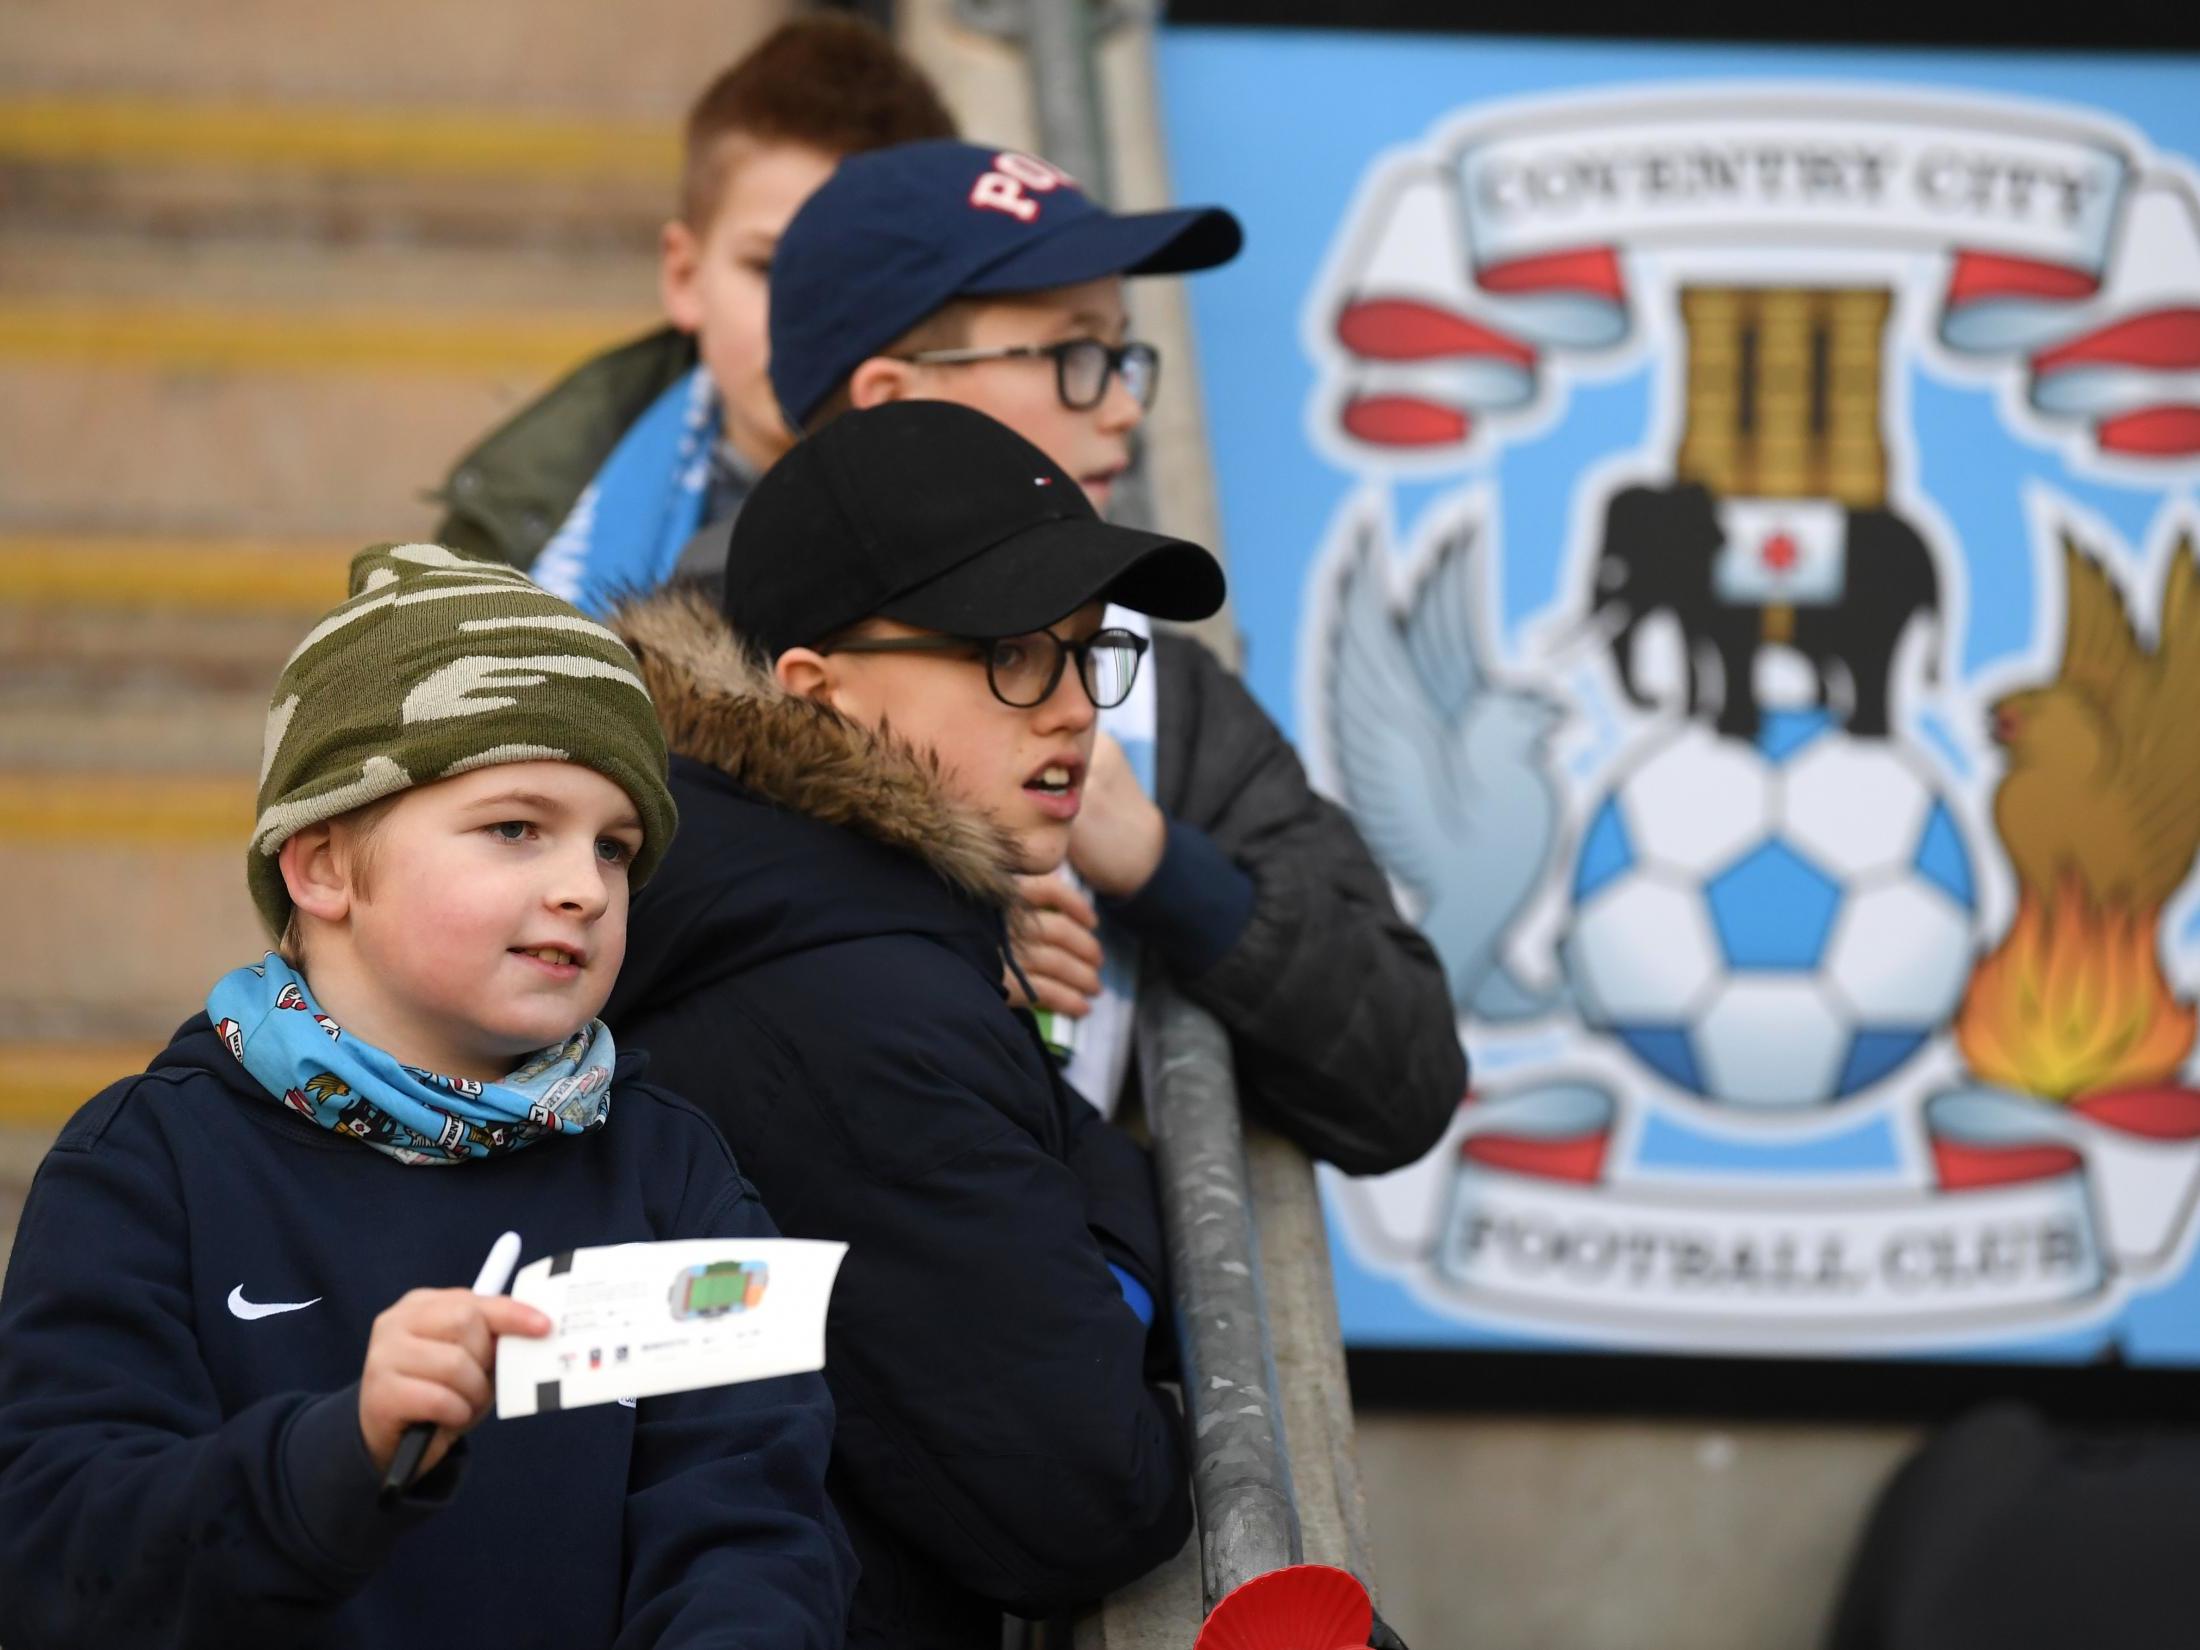 Clubs like Coventry City are on the brink of a financial crisis